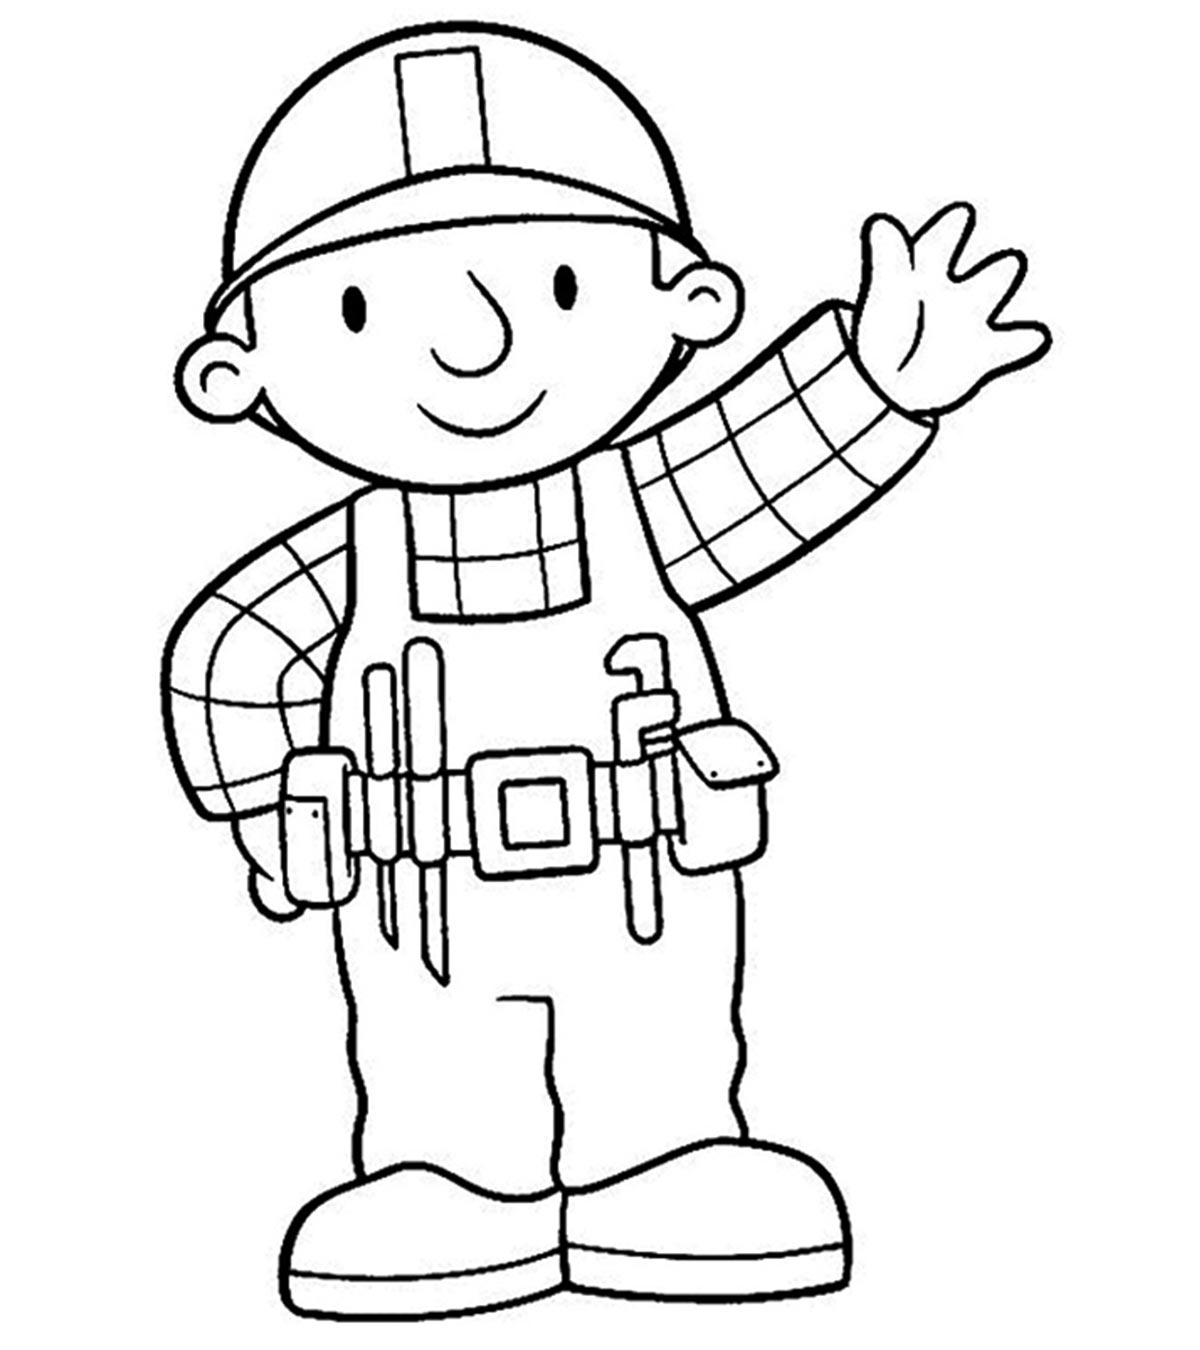 Top 10 Bob The Builder Coloring Pages Your Toddler Will Love_image